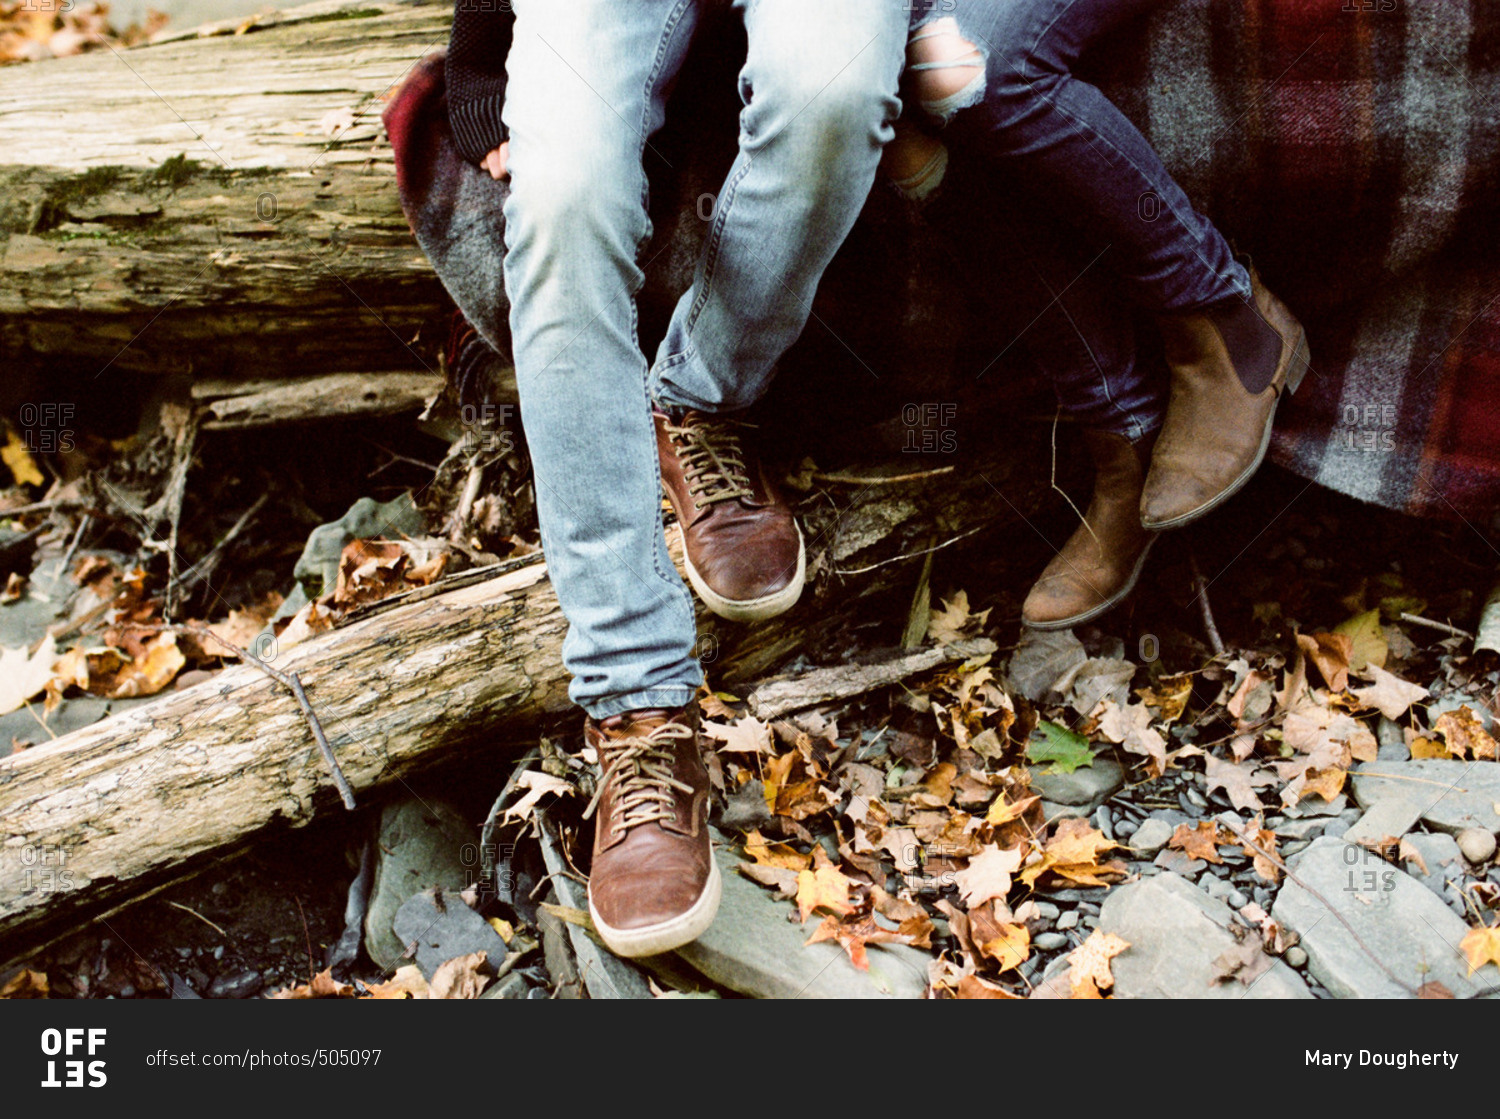 Couple curled up on a flannel blanket on a fallen log